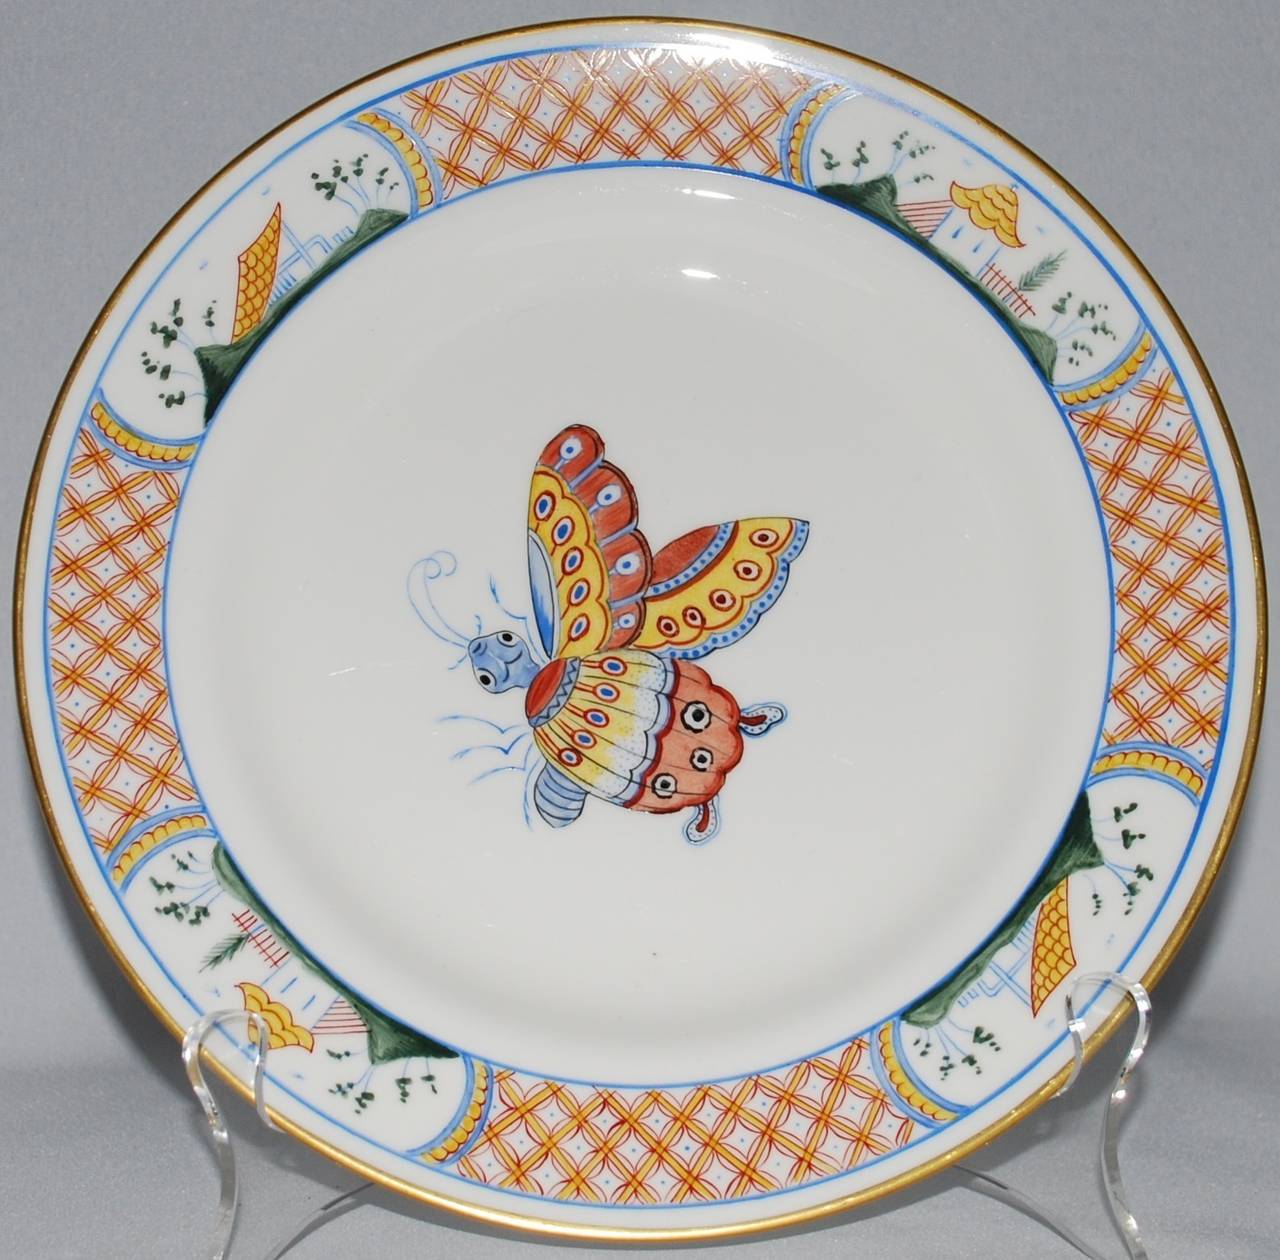 Set of six vintage Tiffany & Co. private stock gilt-rimmed chinoiserie dinner plates hand-painted in France with butterflies. 
Diameter 9.25